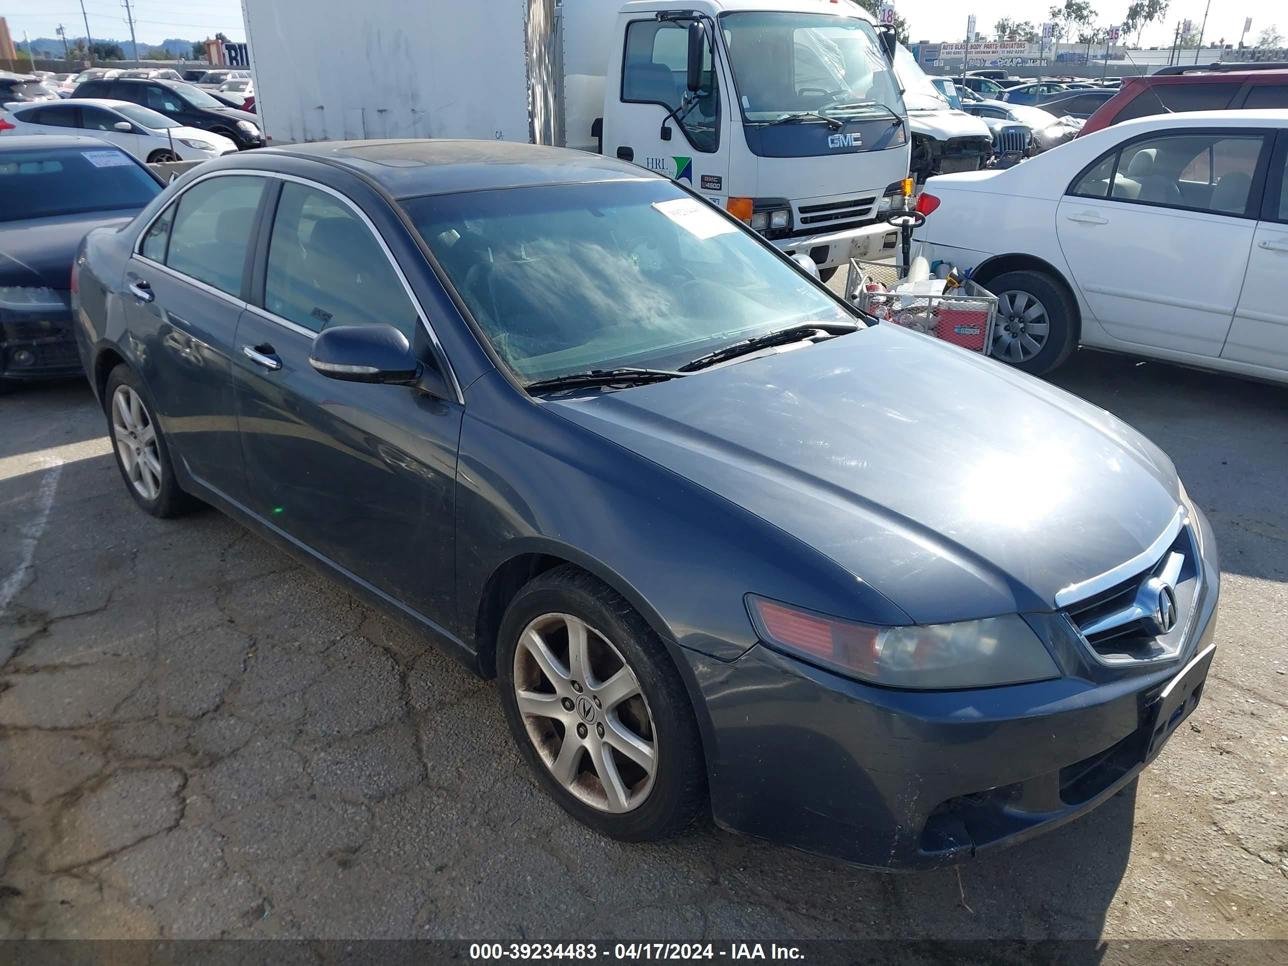 vin: JH4CL96975C034245 JH4CL96975C034245 2005 acura tsx 2400 for Sale in 91605, 7245 Laurel Canyon Blvd, Los Angeles, California, USA